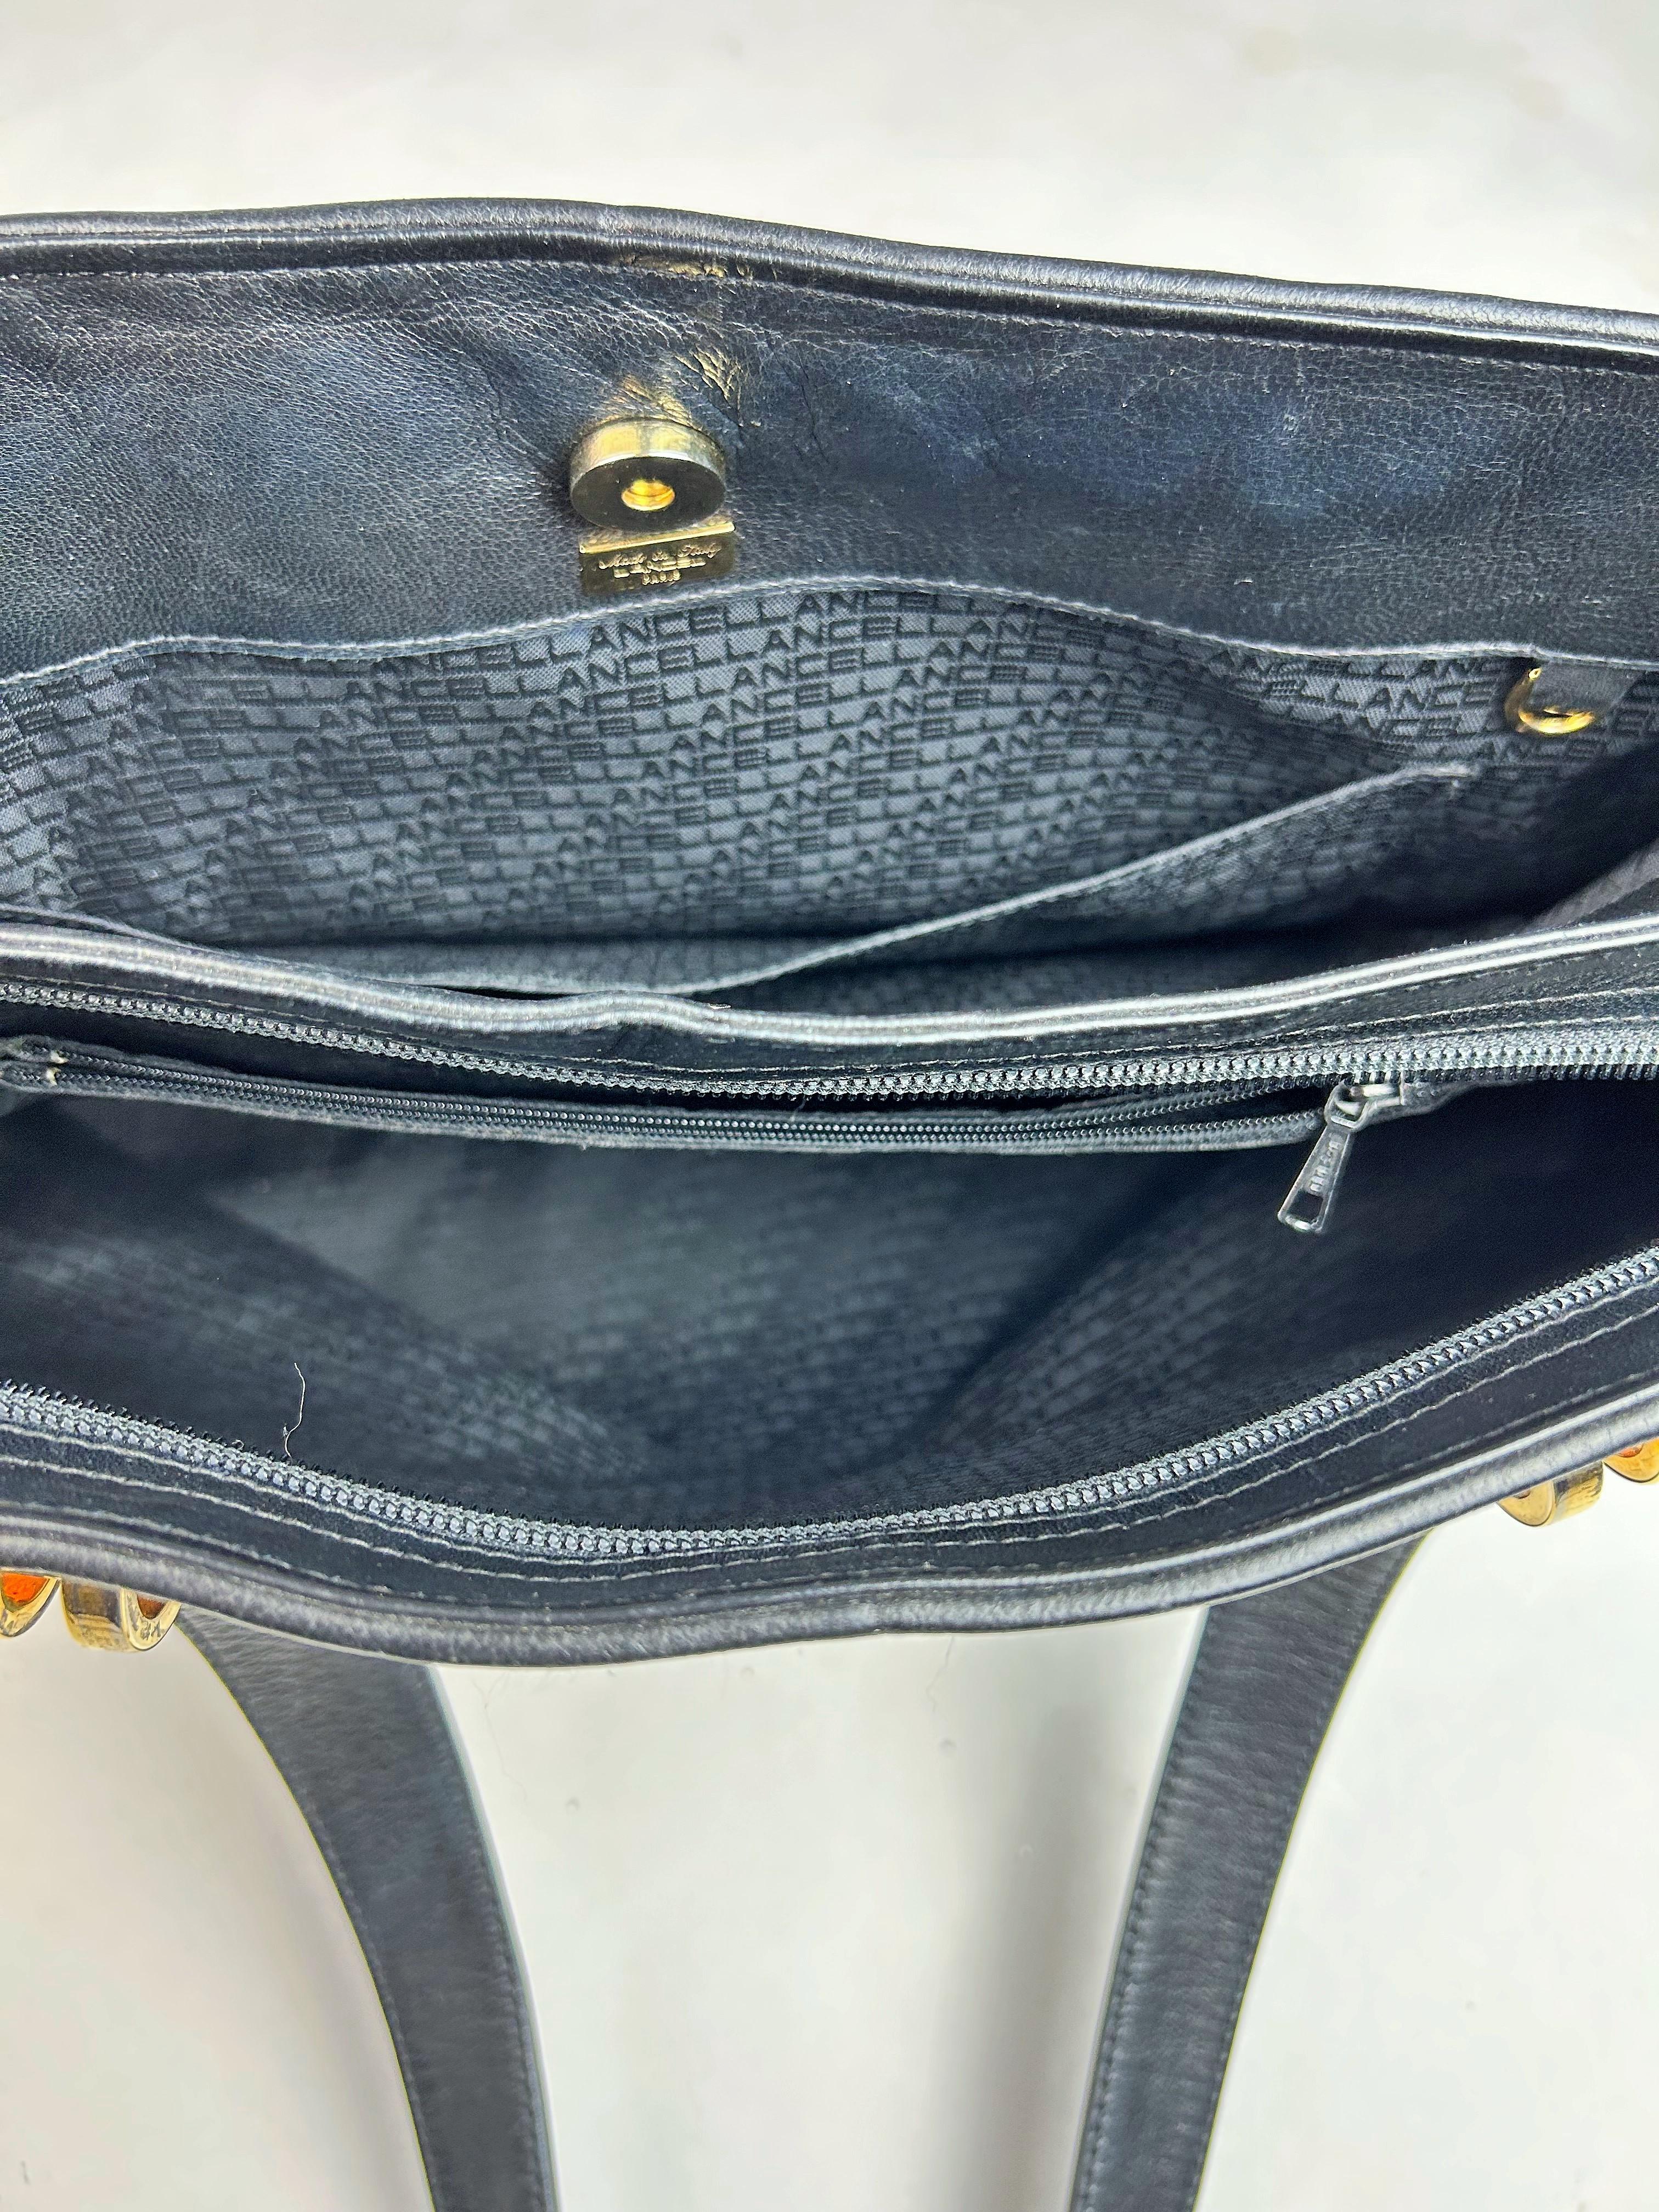 Navy-blue leather bag by Lancel with pouch - France Circa 1990 For Sale 7